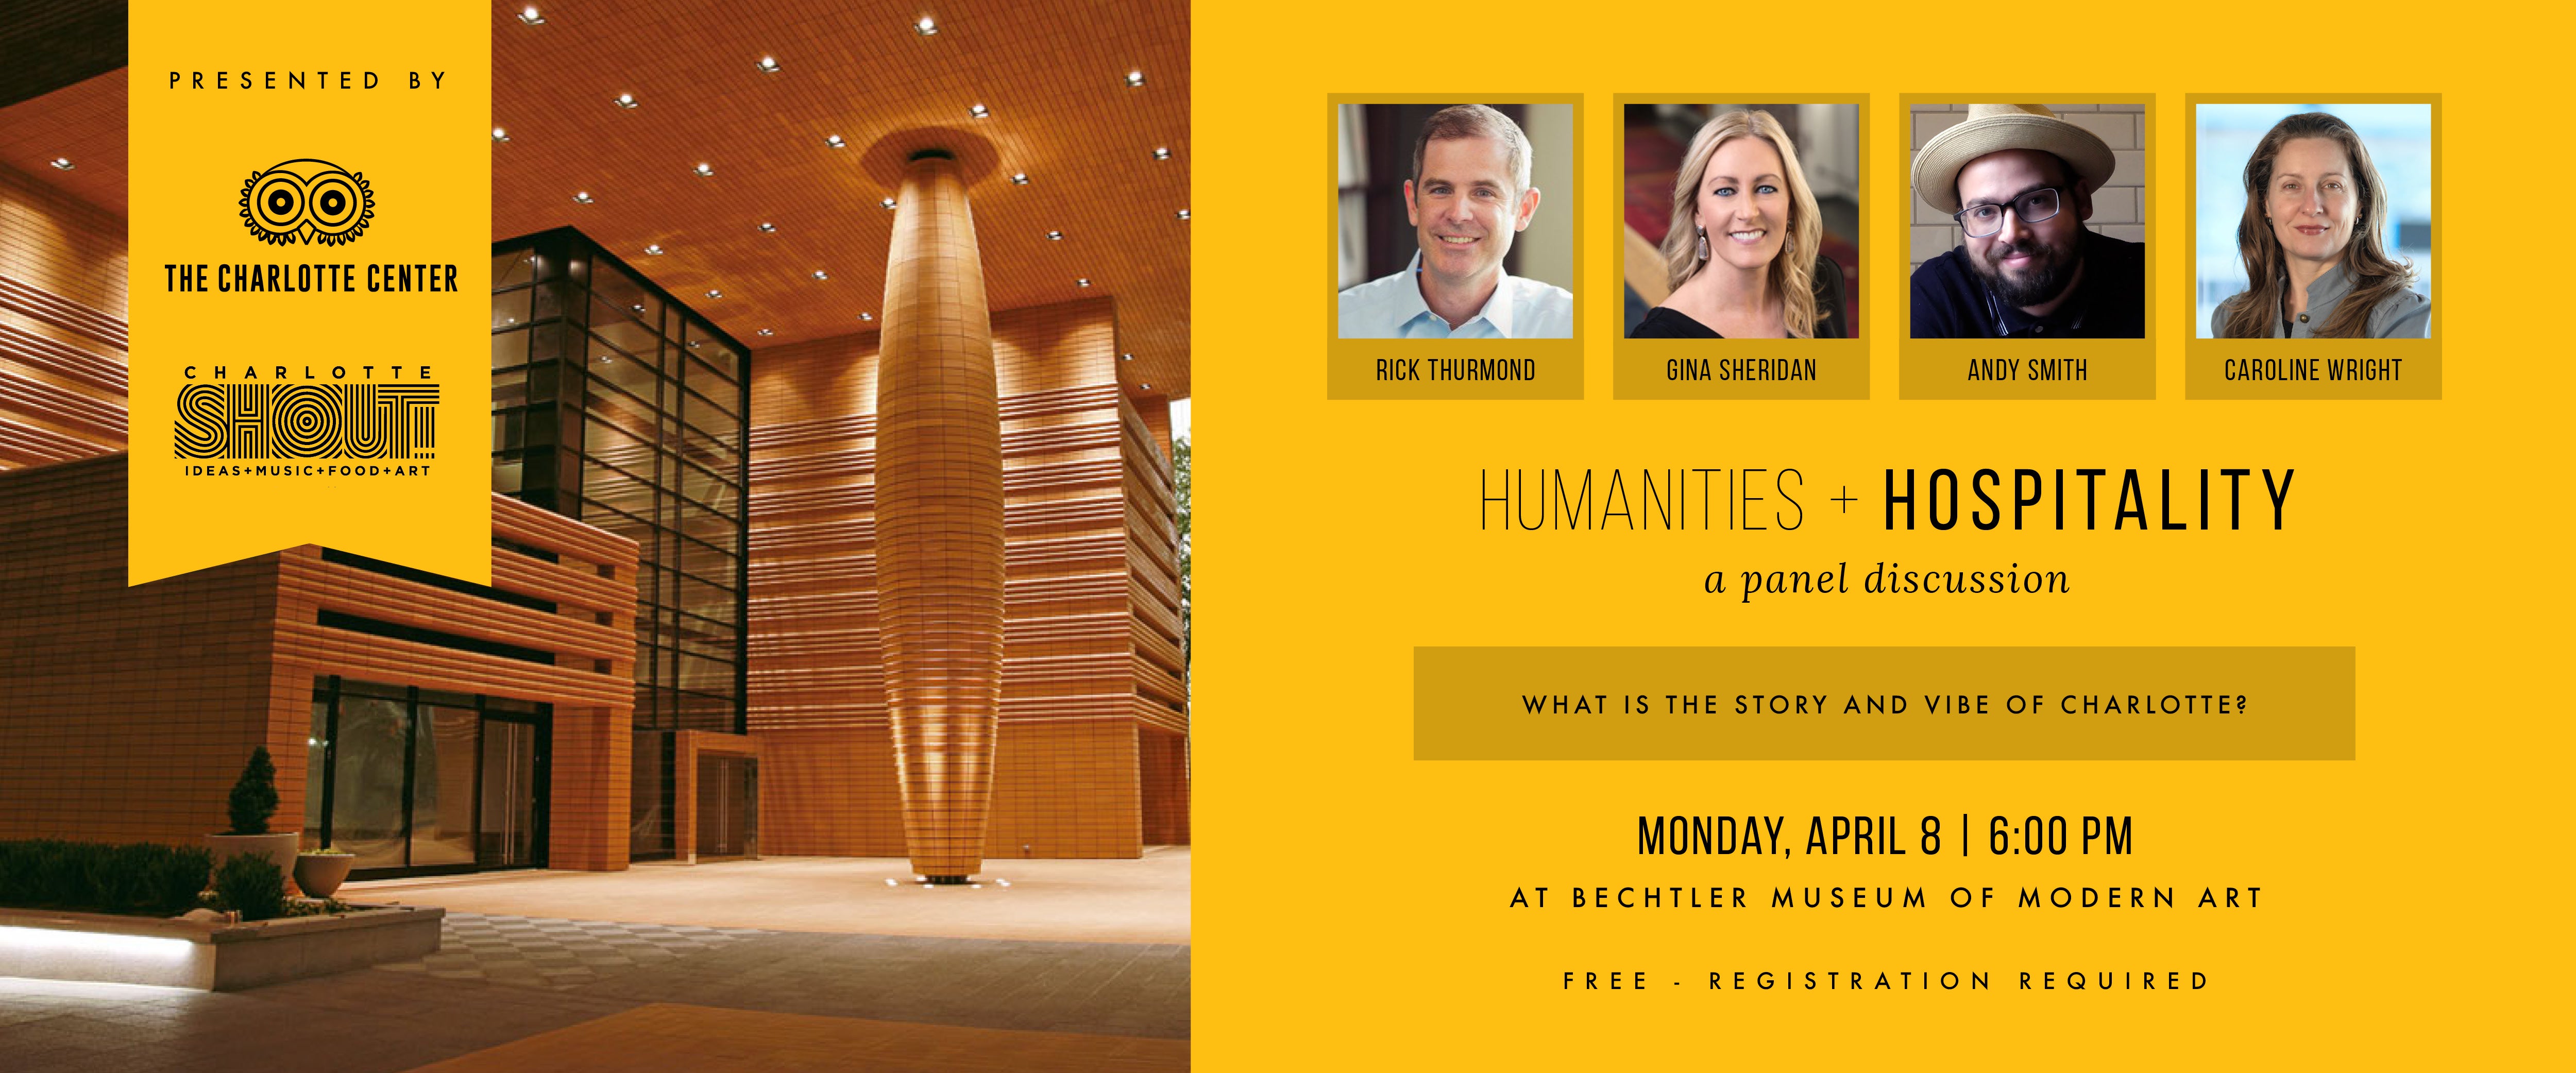 Humanities + Hospitality: A Panel Discussion!